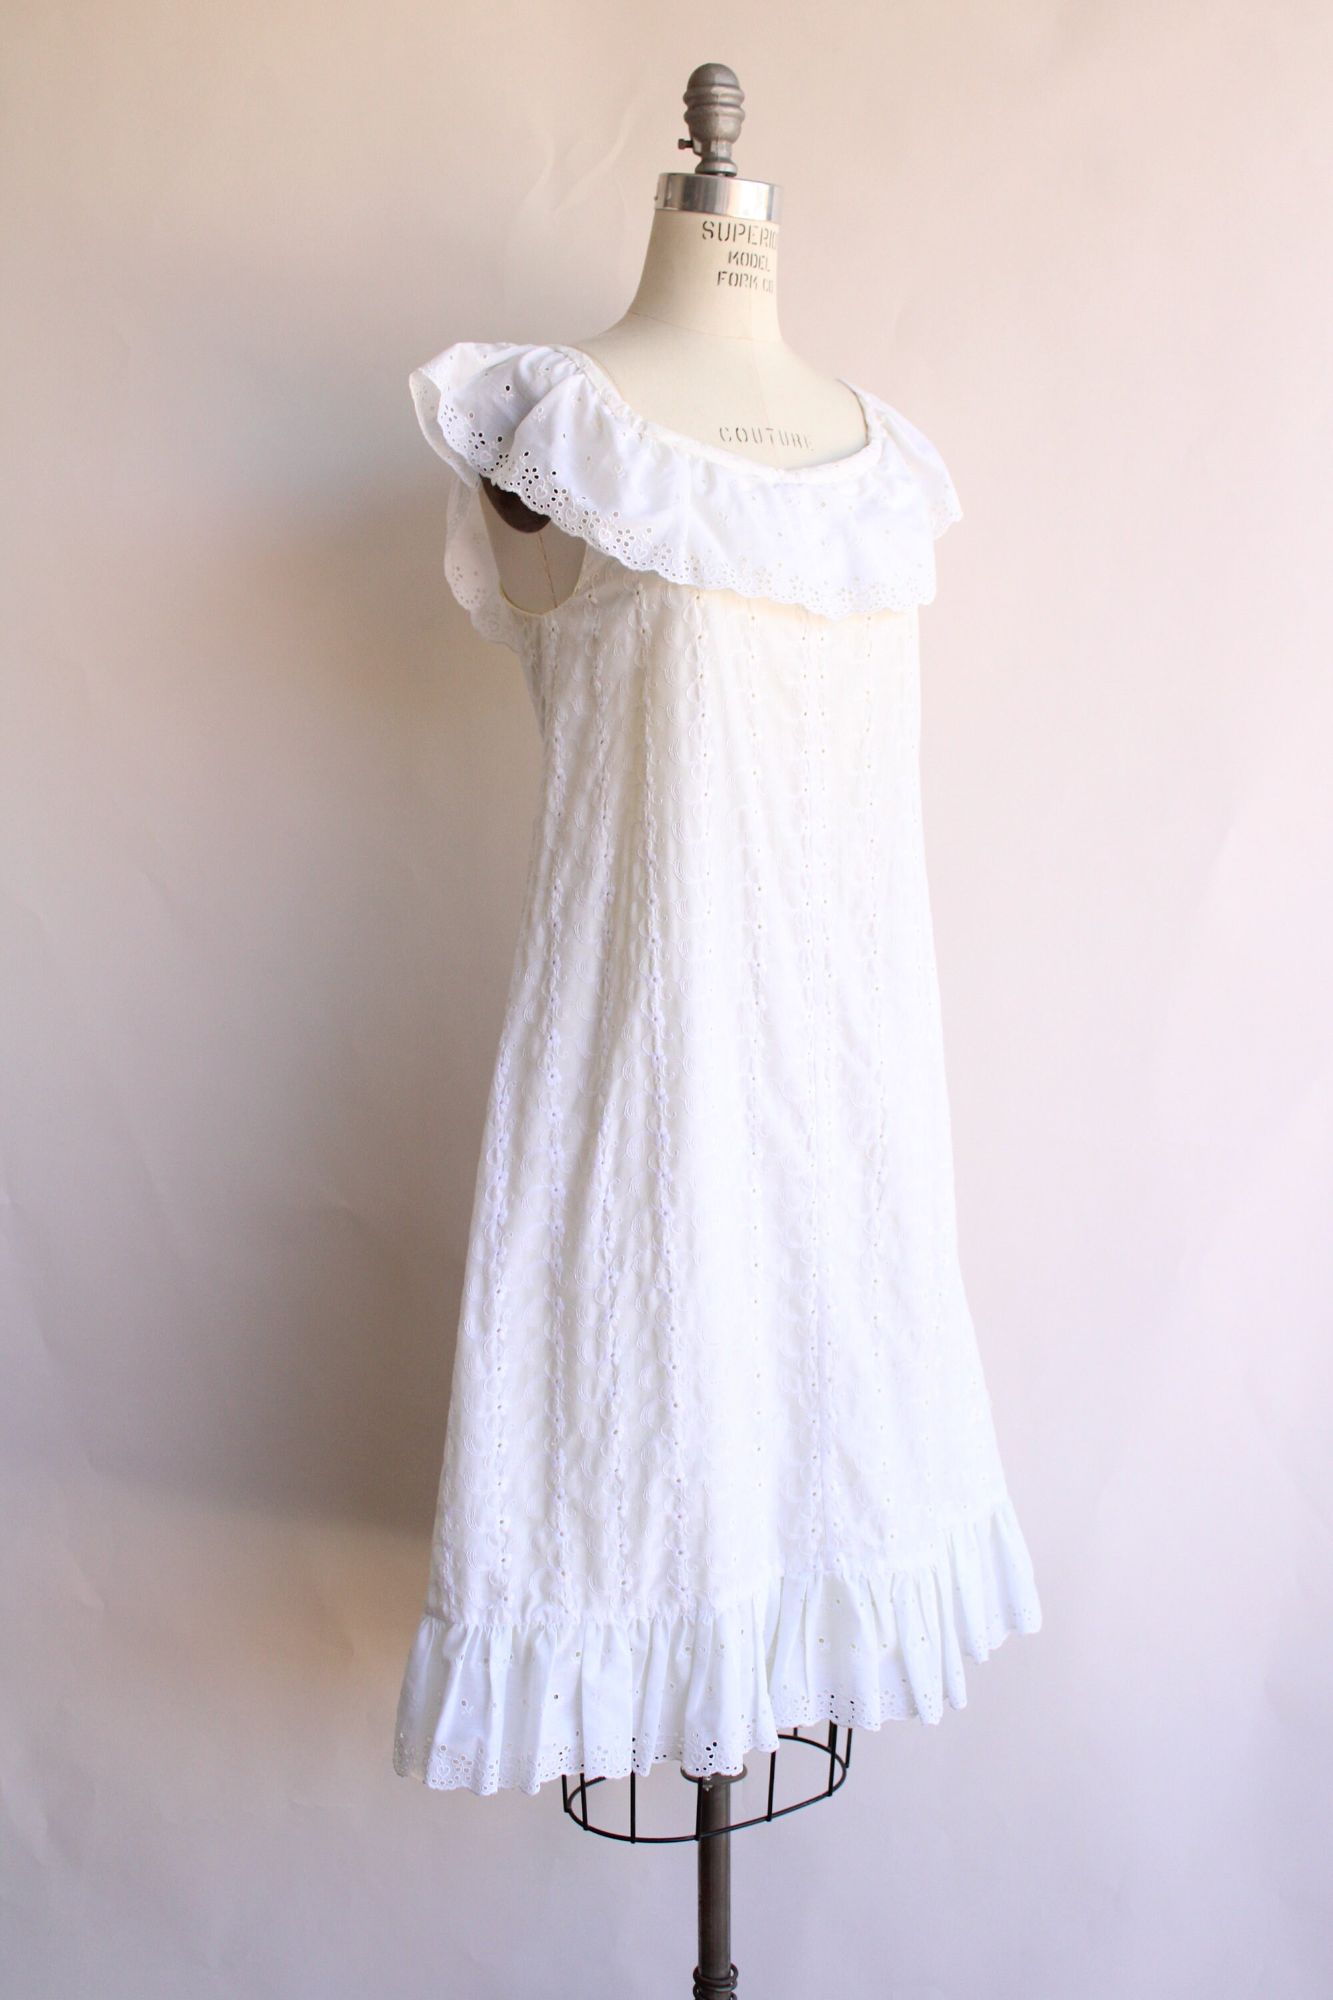 Vintage 1970s 1980s White Eyelet Dress in Embroidered Floral with Yellow Lining